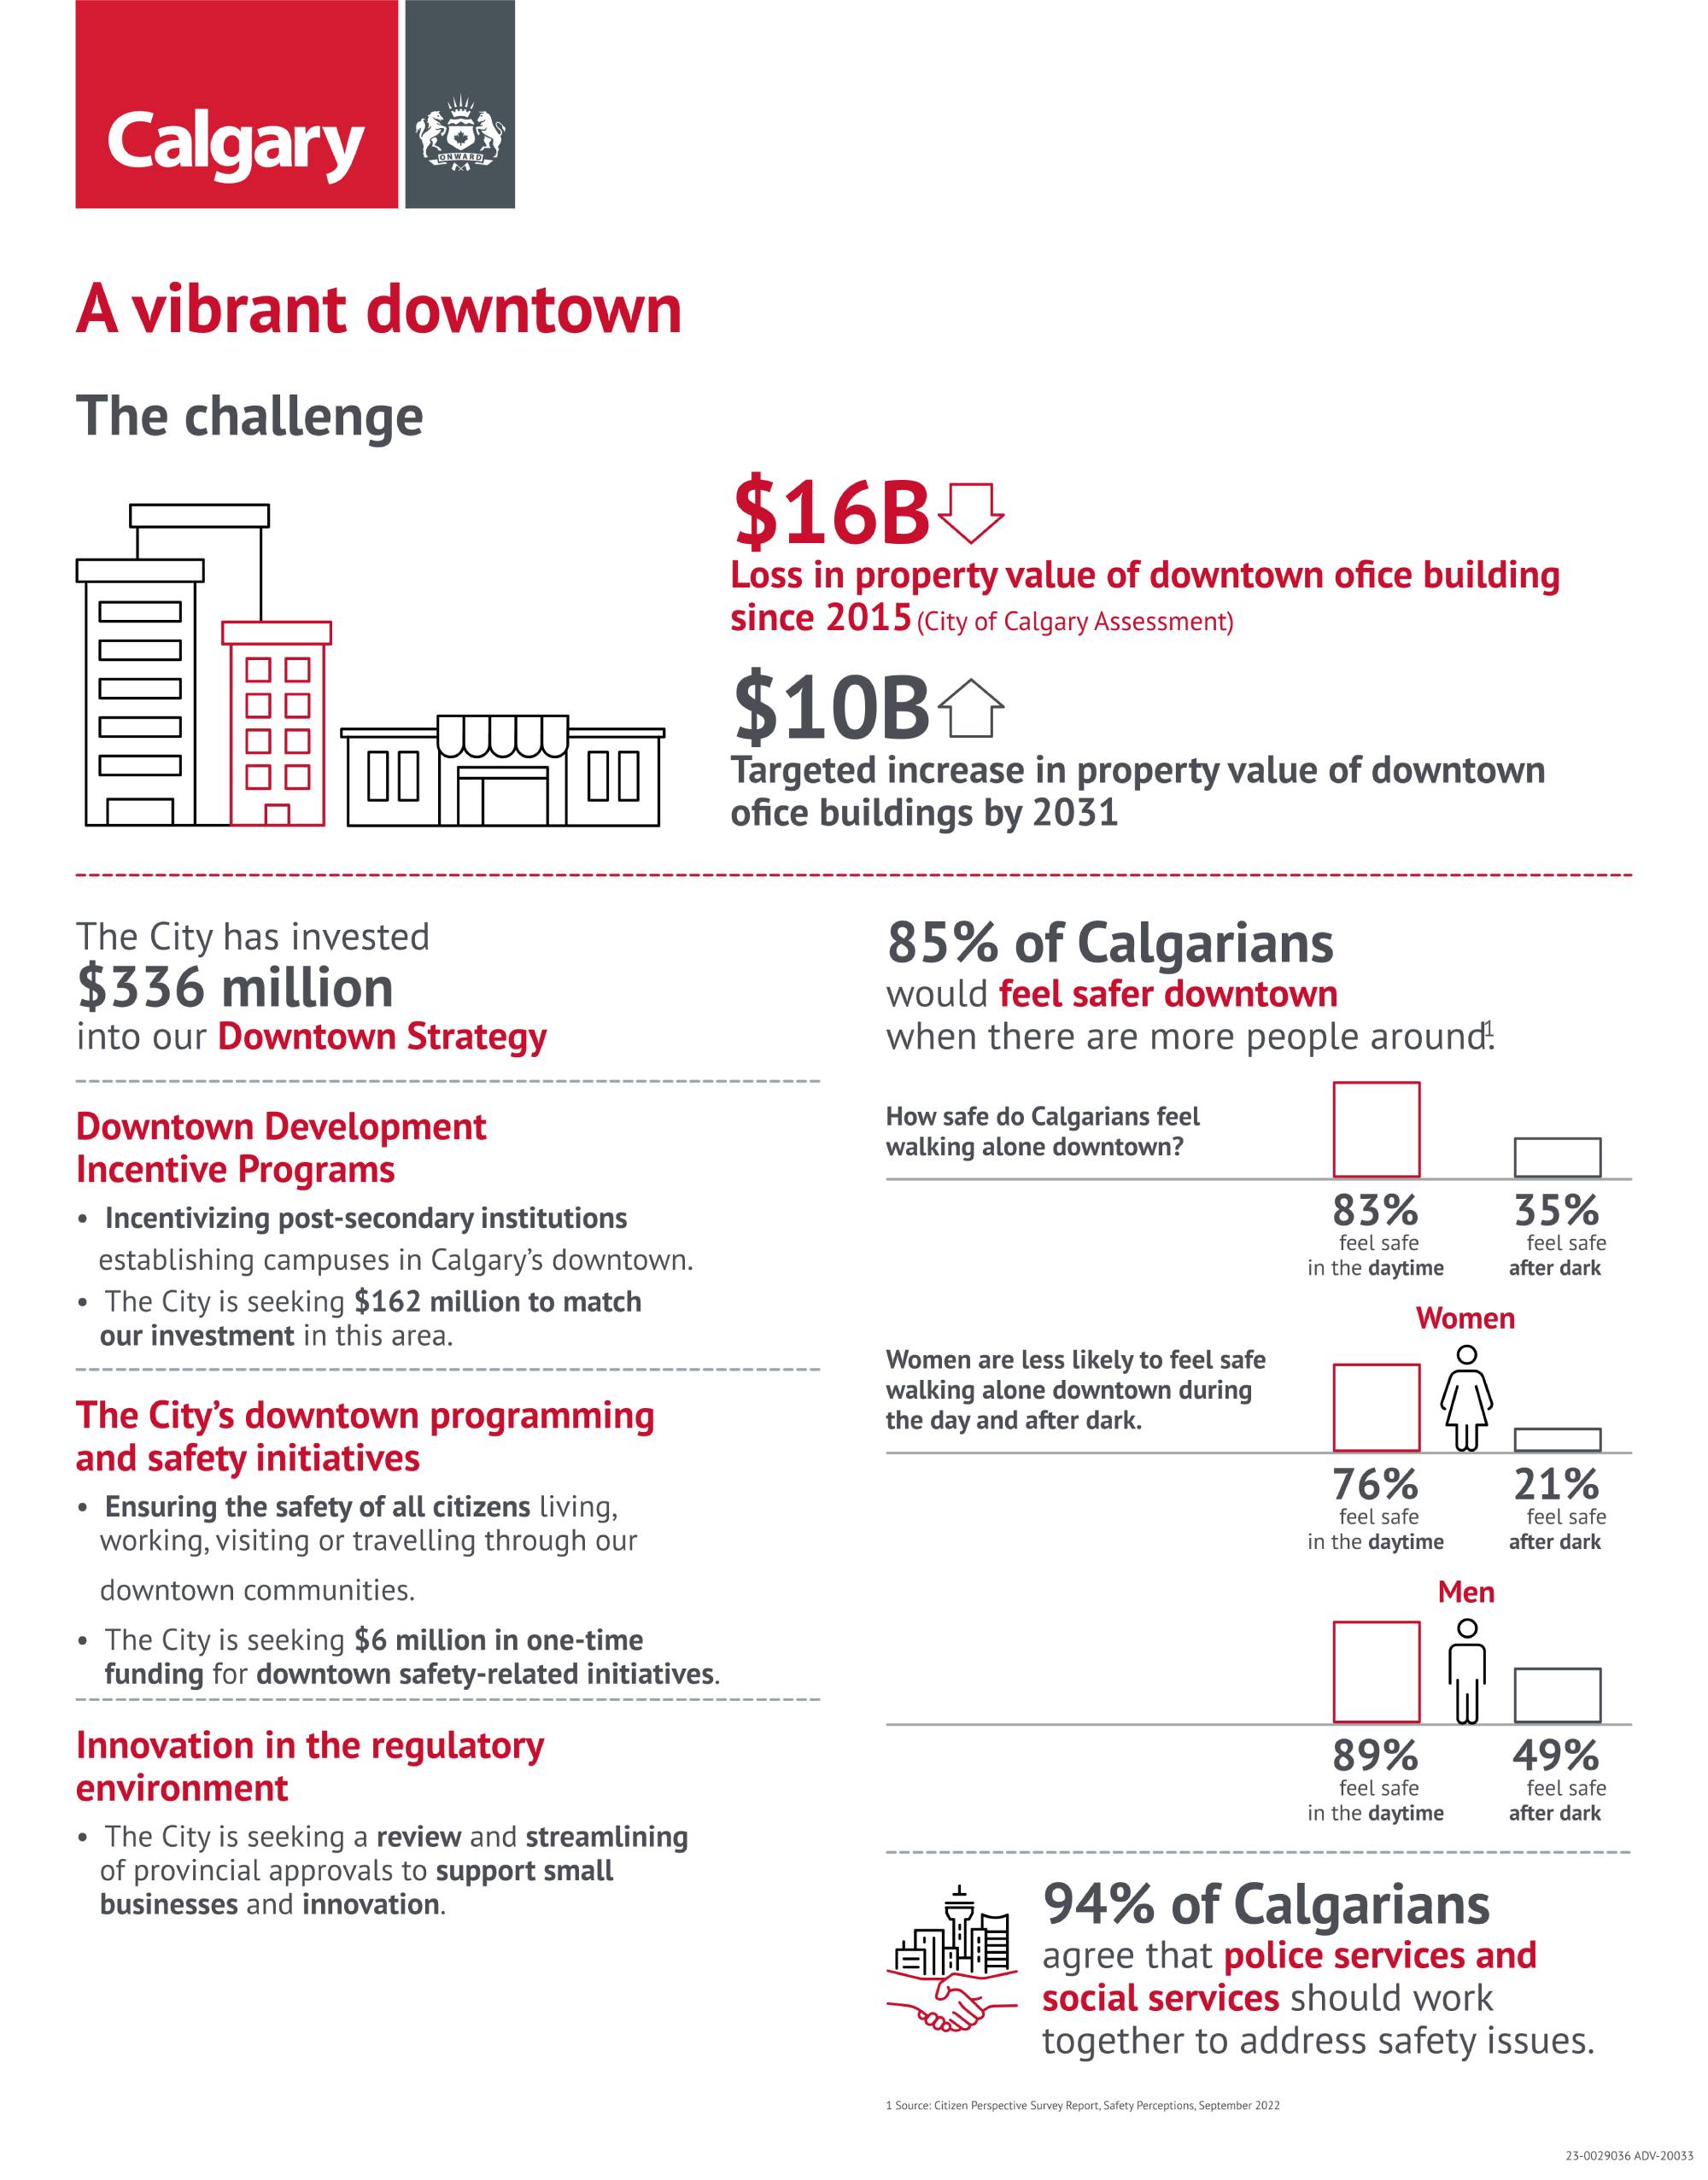 Vibrant downtown infographic